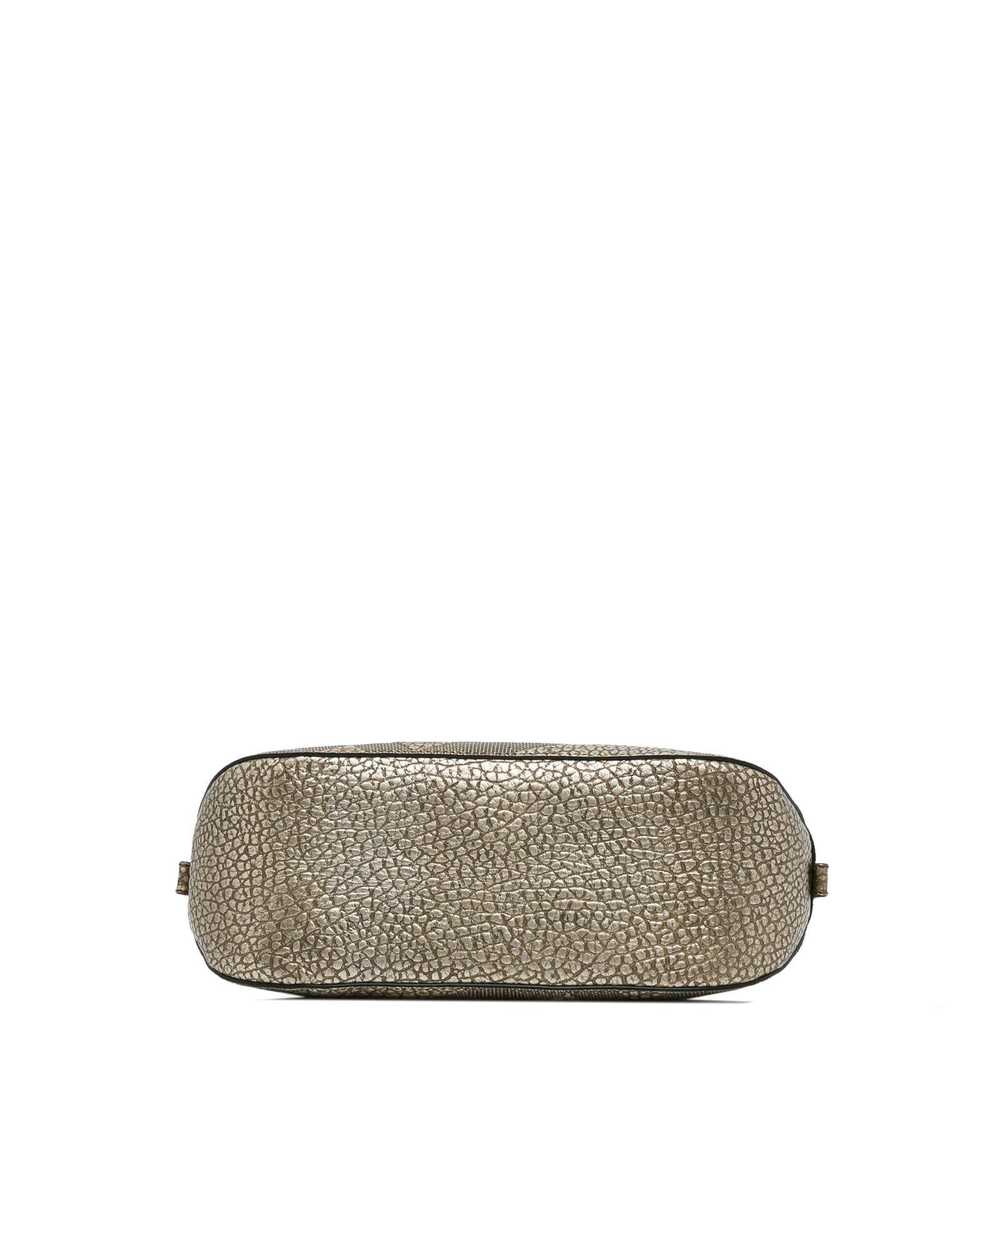 Burberry Grained Leather Orchard Handle Bag - image 5